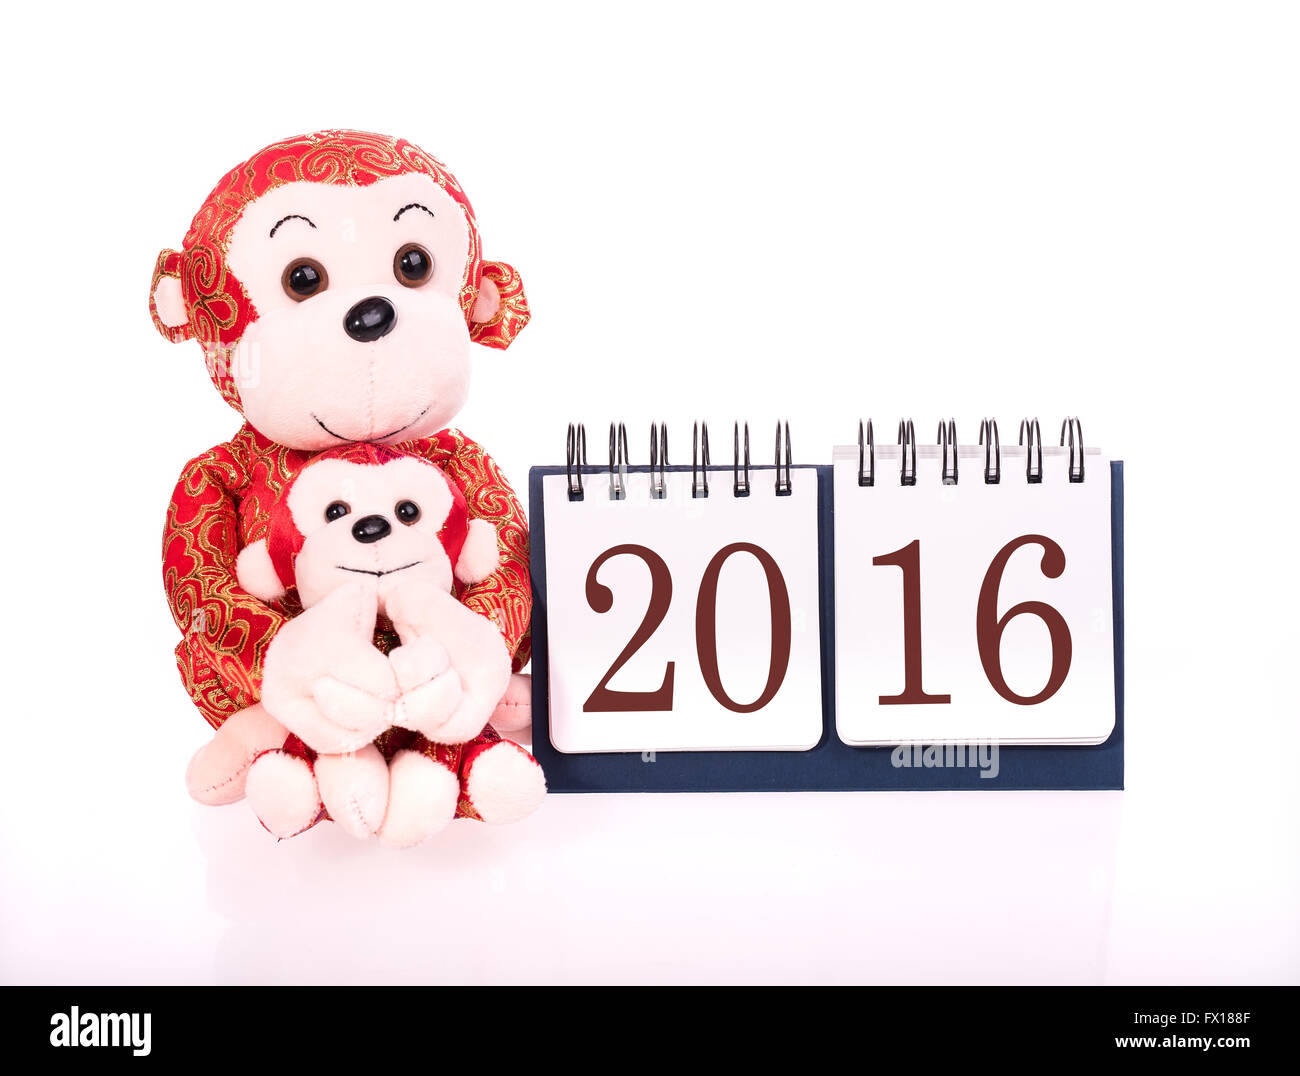 Chinese lunar new year ornaments toy of monkey on festive background Stock Photo